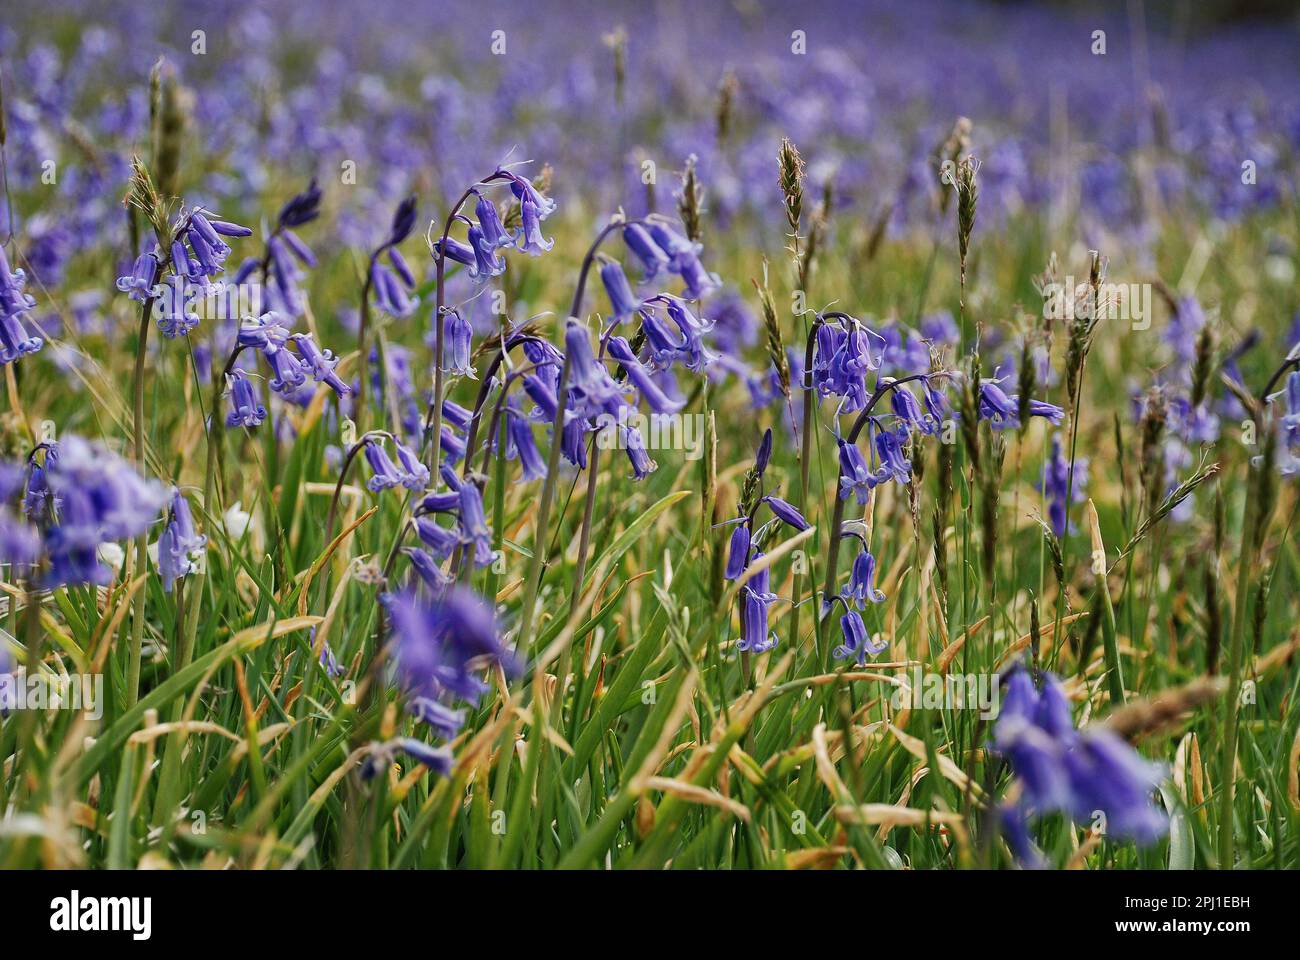 A  mass of bluebells, Hyacinthoides non-scripta,sweet-scented viollet-blue flowers in the spring in North Yorkshire, UK. Stock Photo